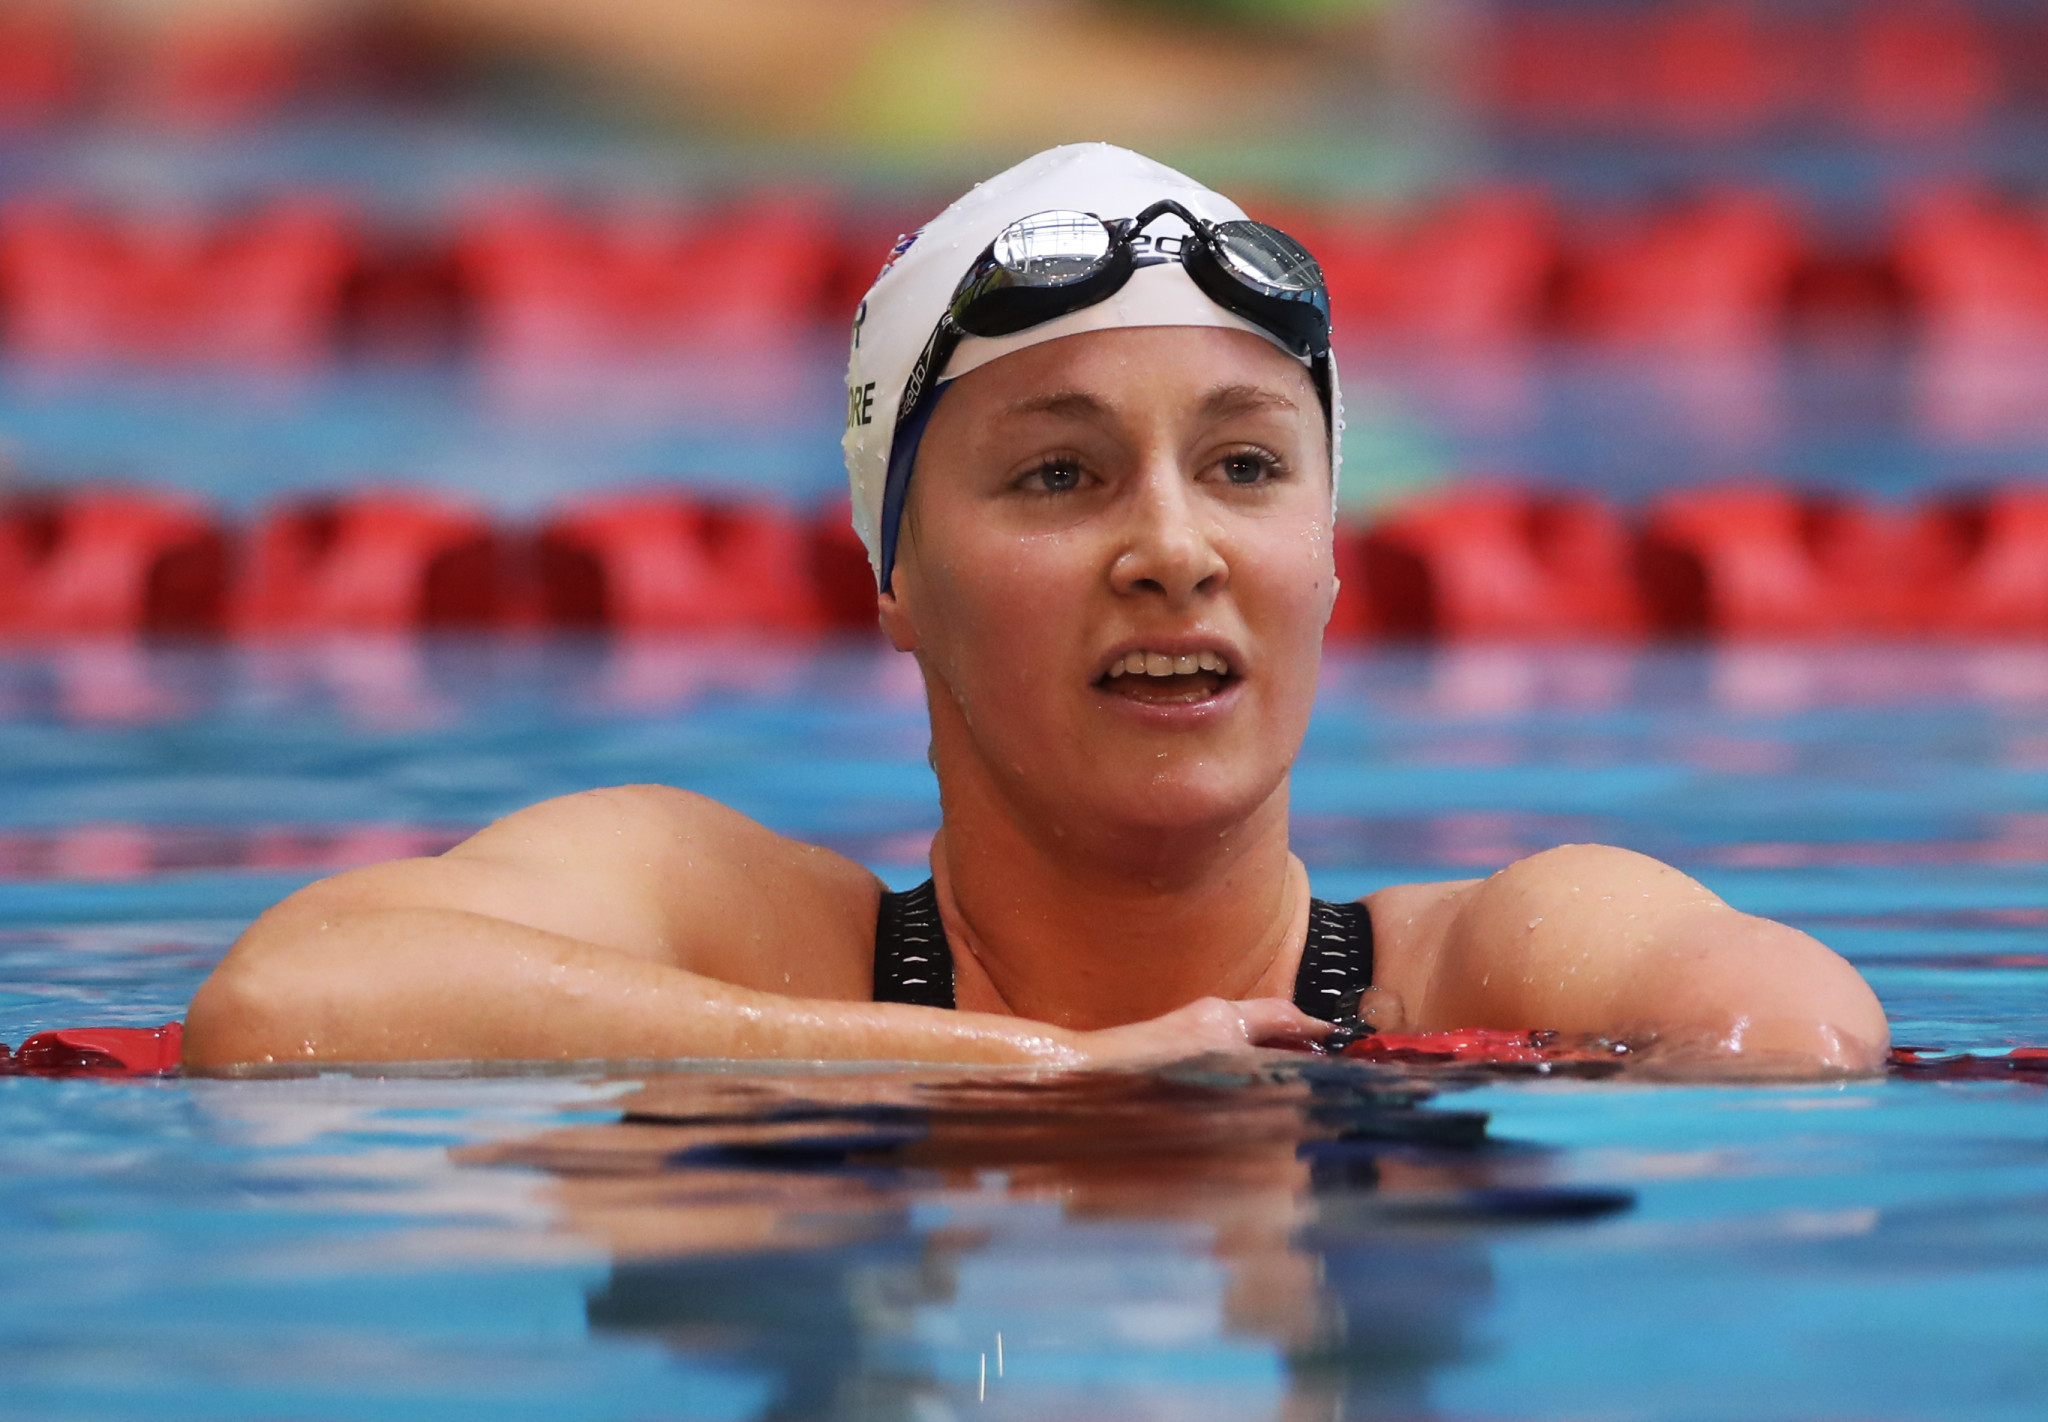 Swimmer-turned-triathlete Claire Cashmore is among the nominees ©Getty Images